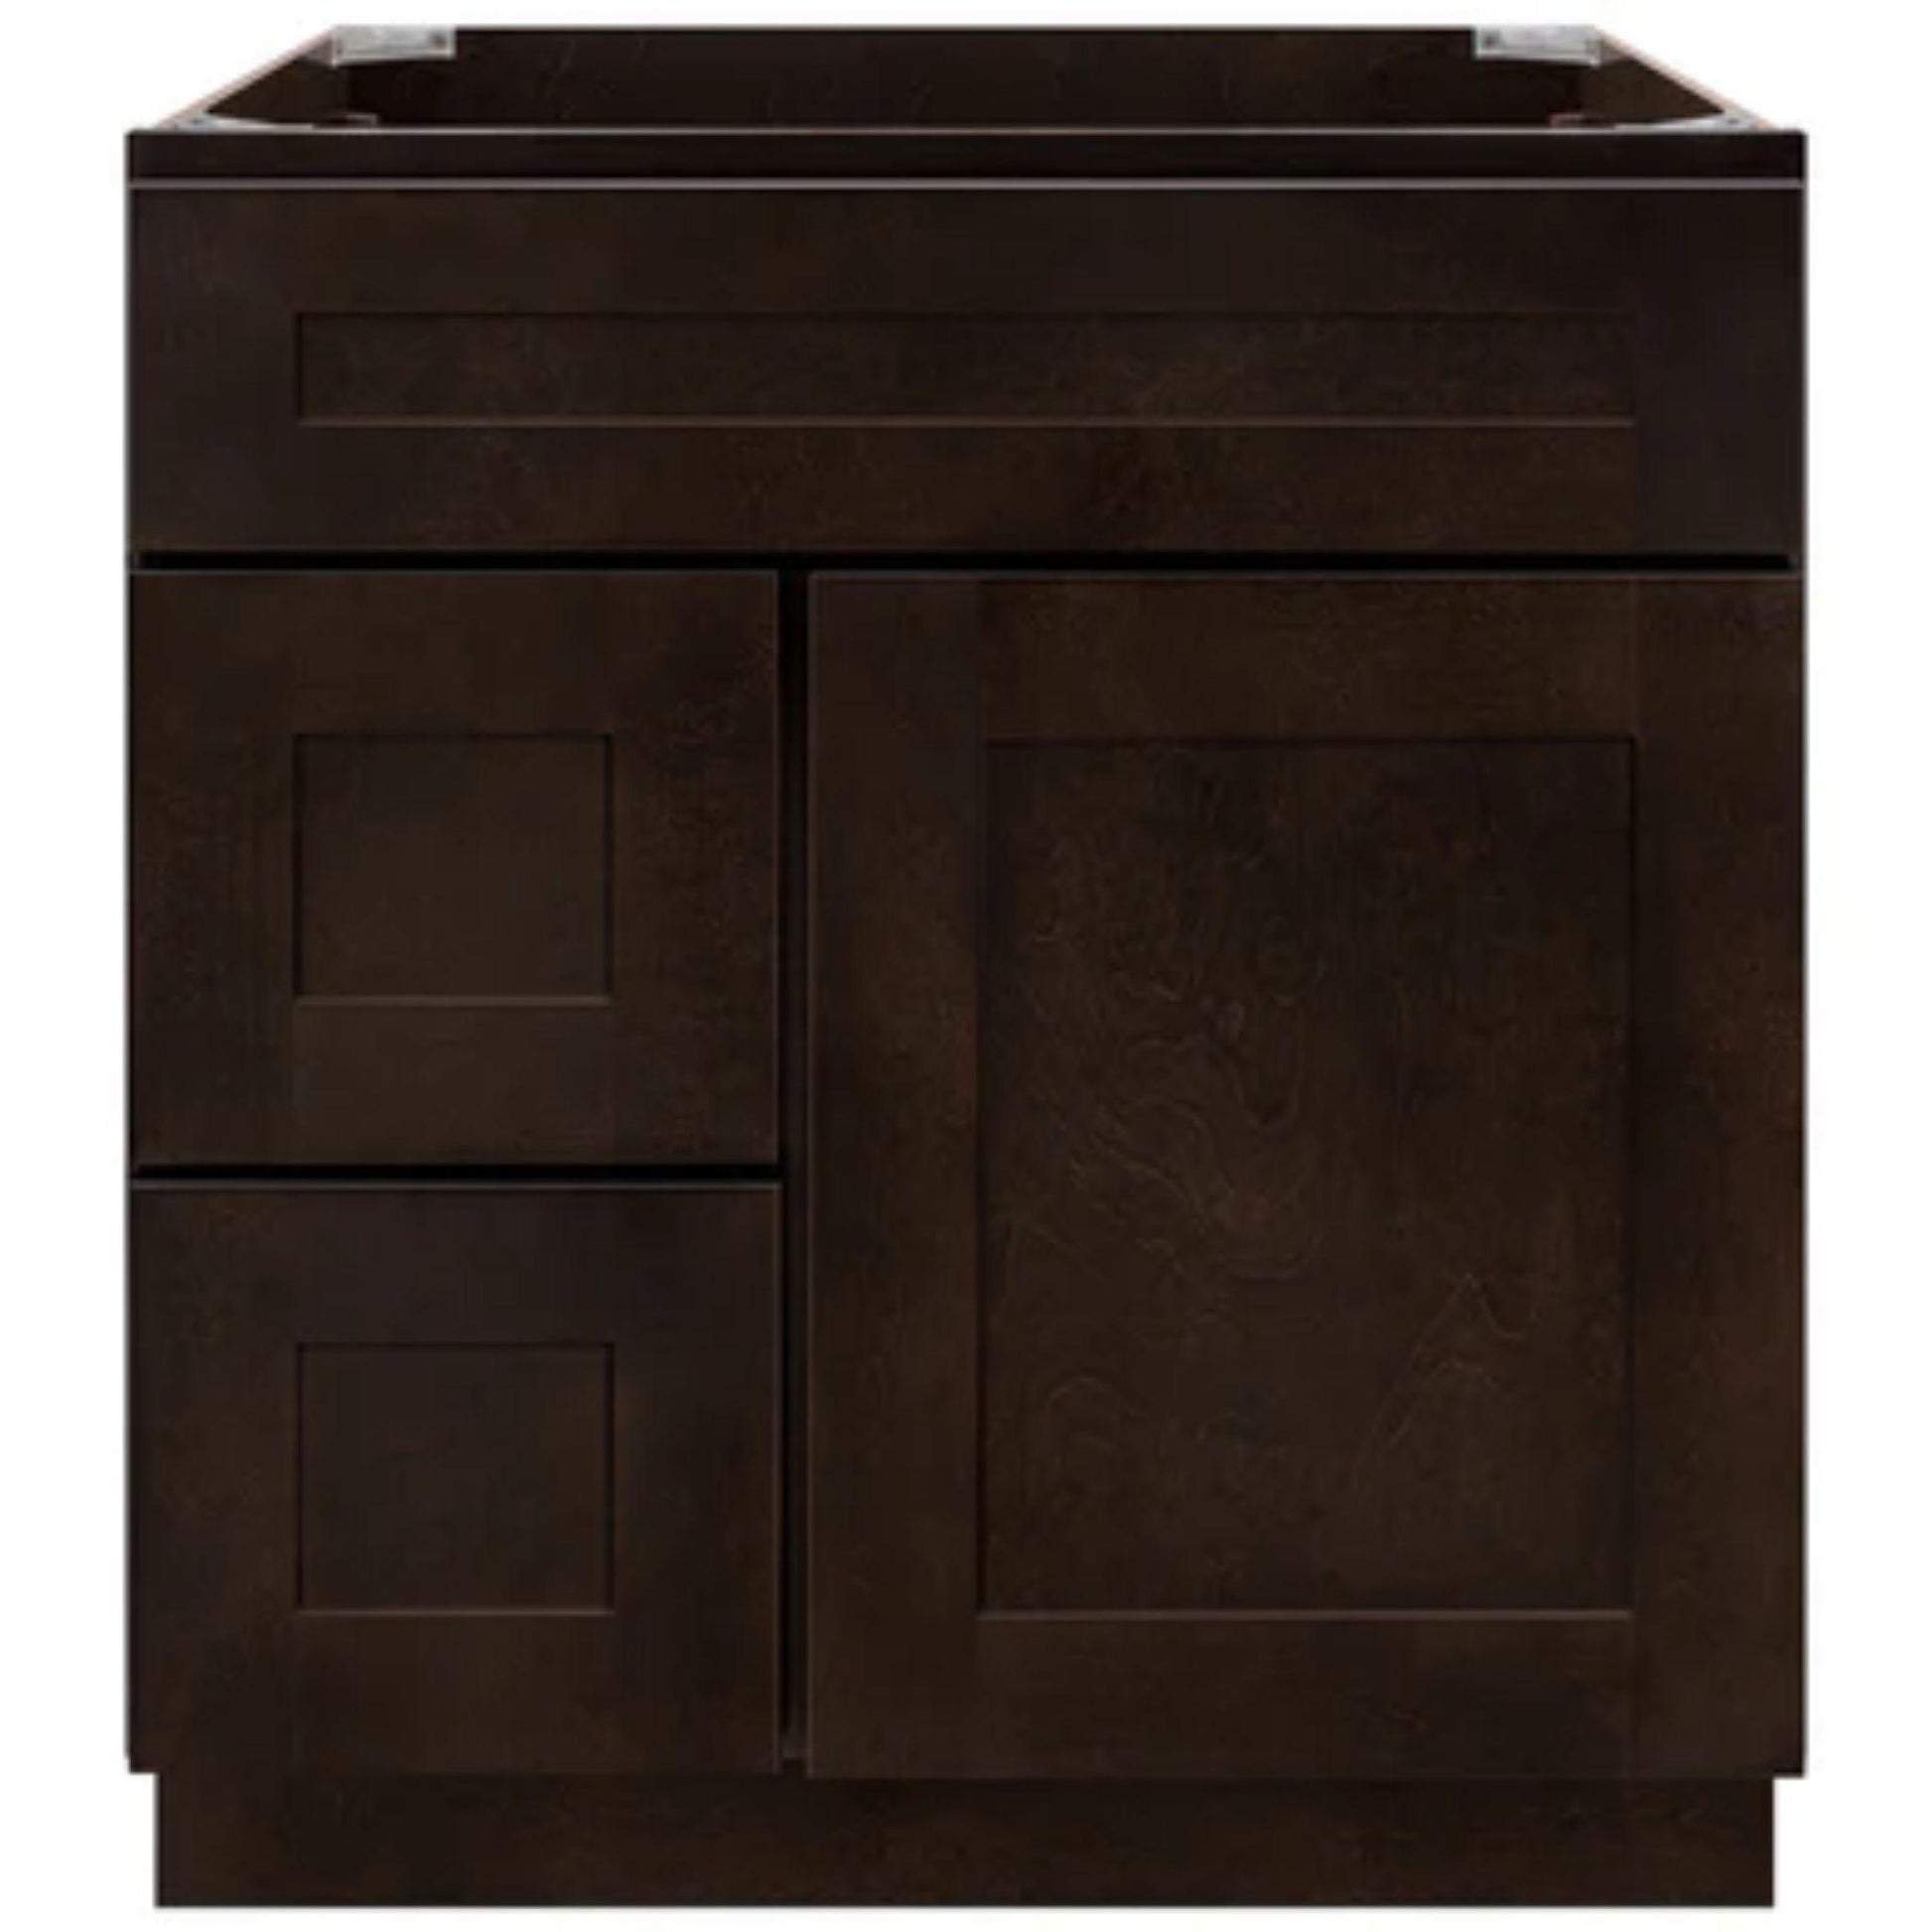 LessCare 30" x 21" x 34 1/2" Espresso Shaker Vanity Sink Base Cabinet with Left Drawers